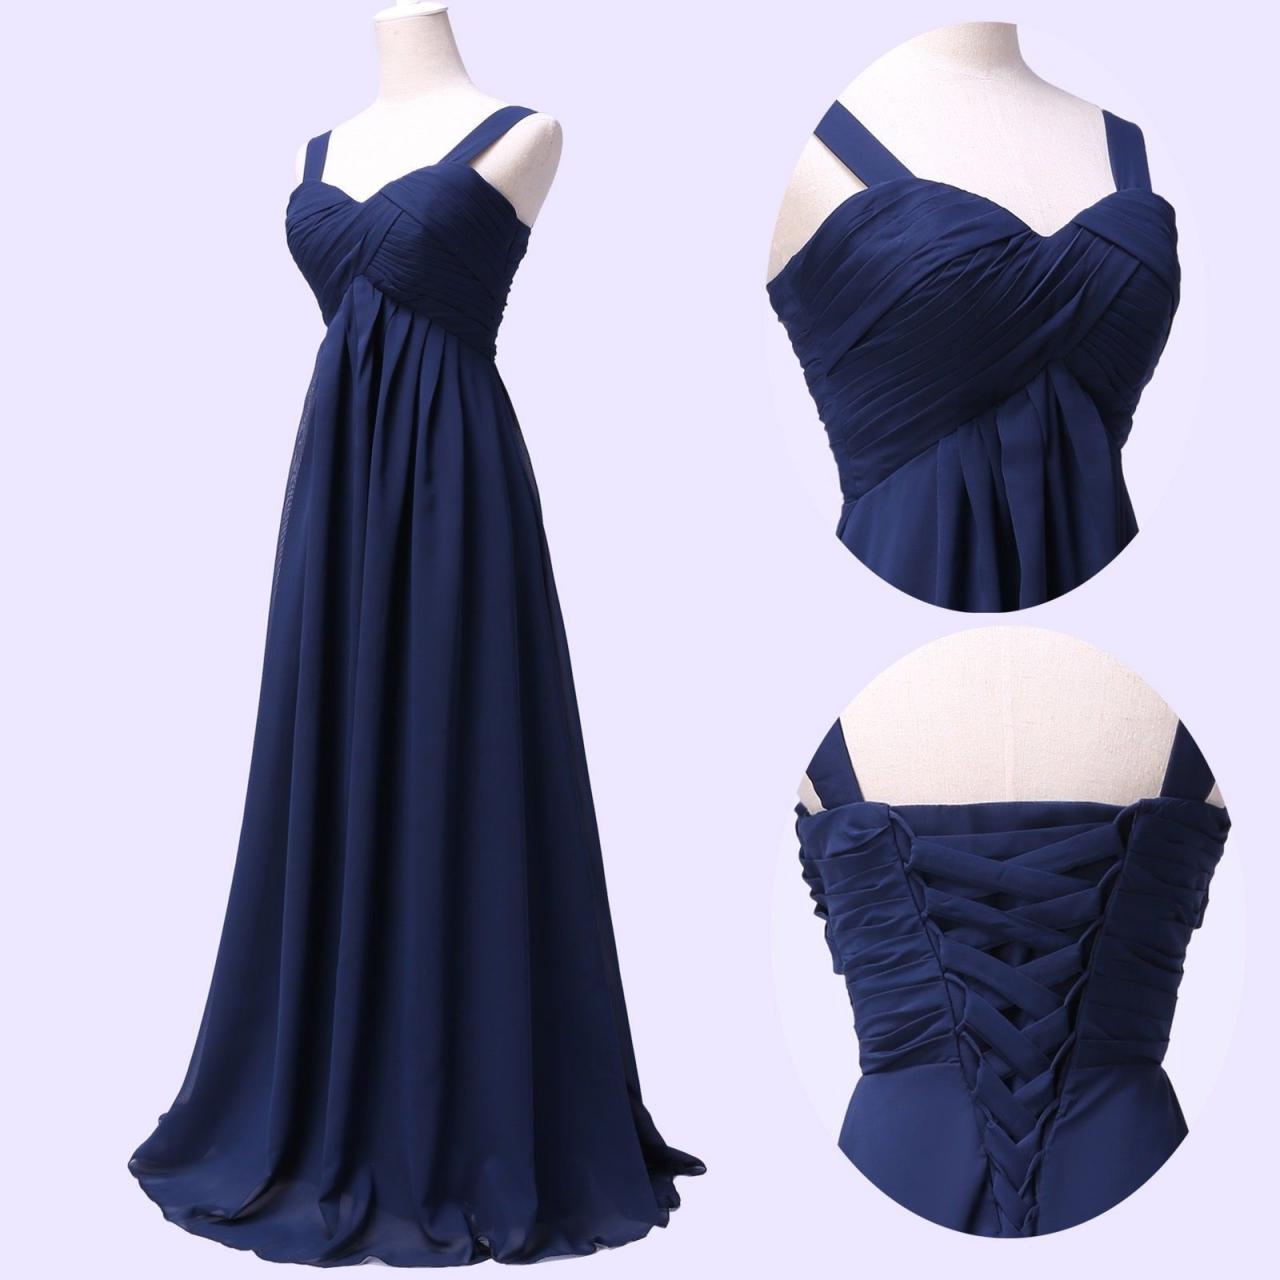 2017 Custom Made Navy Blue Prom Dress,sexy Spaghetti Straps Evening Dress,sexy Lace Up Party Dress,high Quality